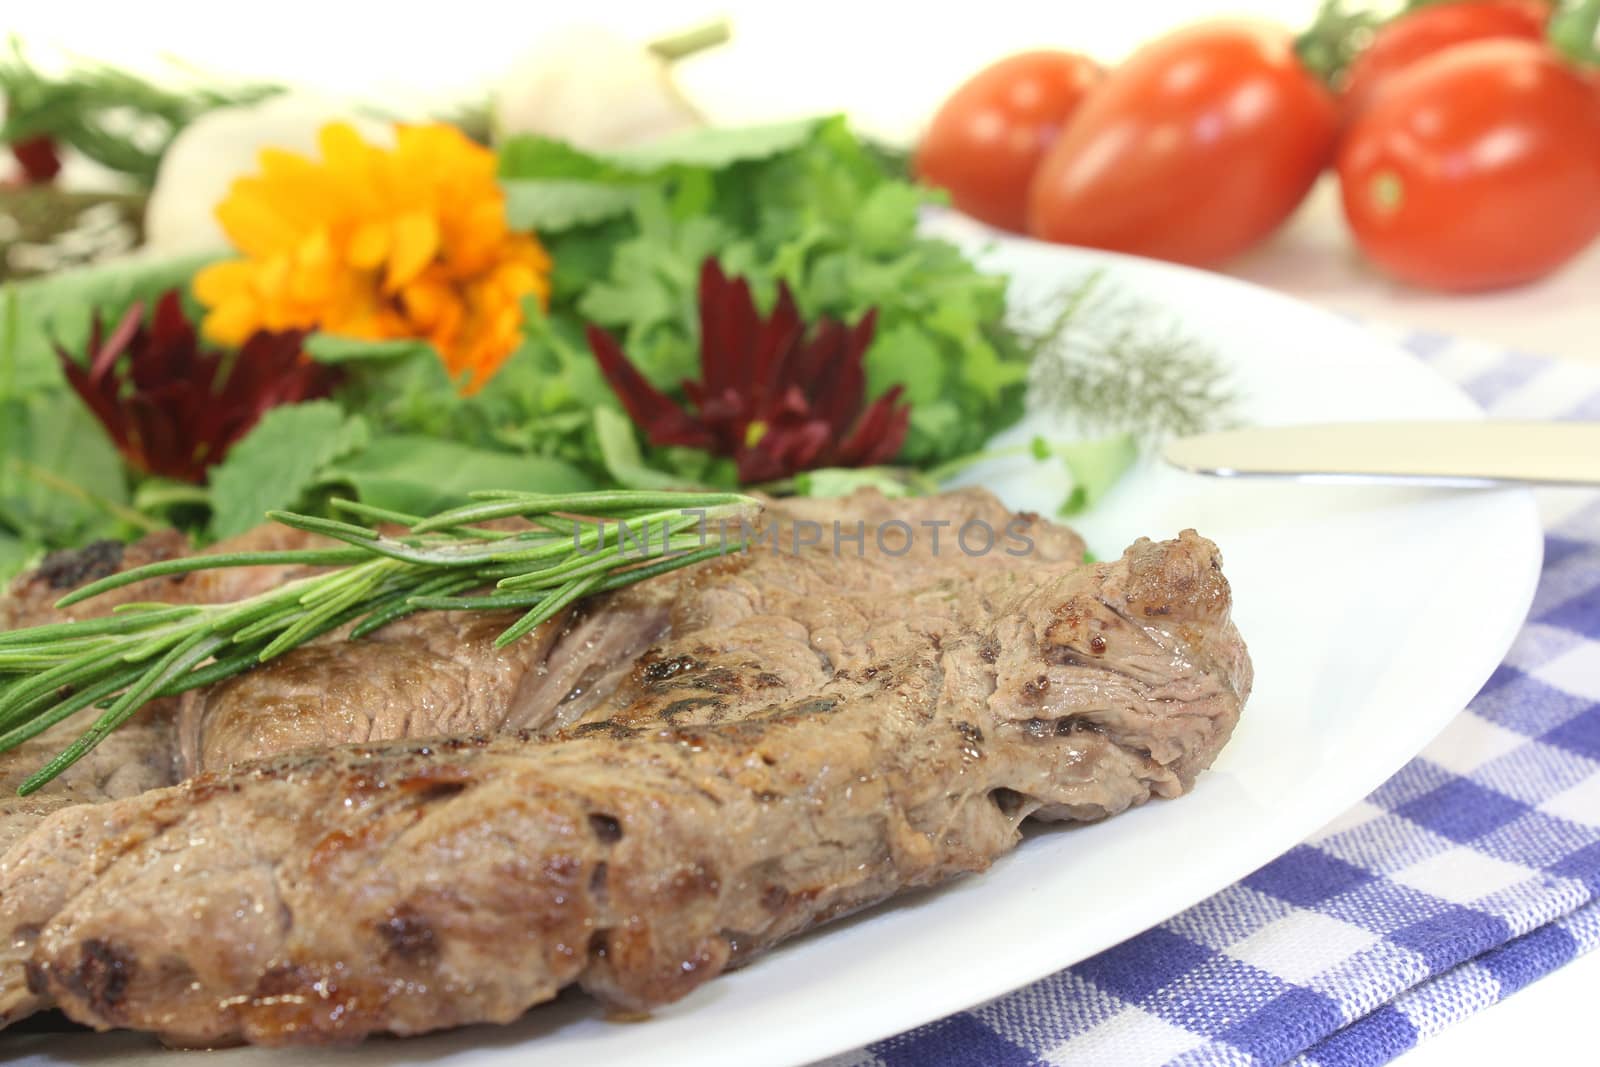 fried Sirloin steak with wild herb salad by discovery